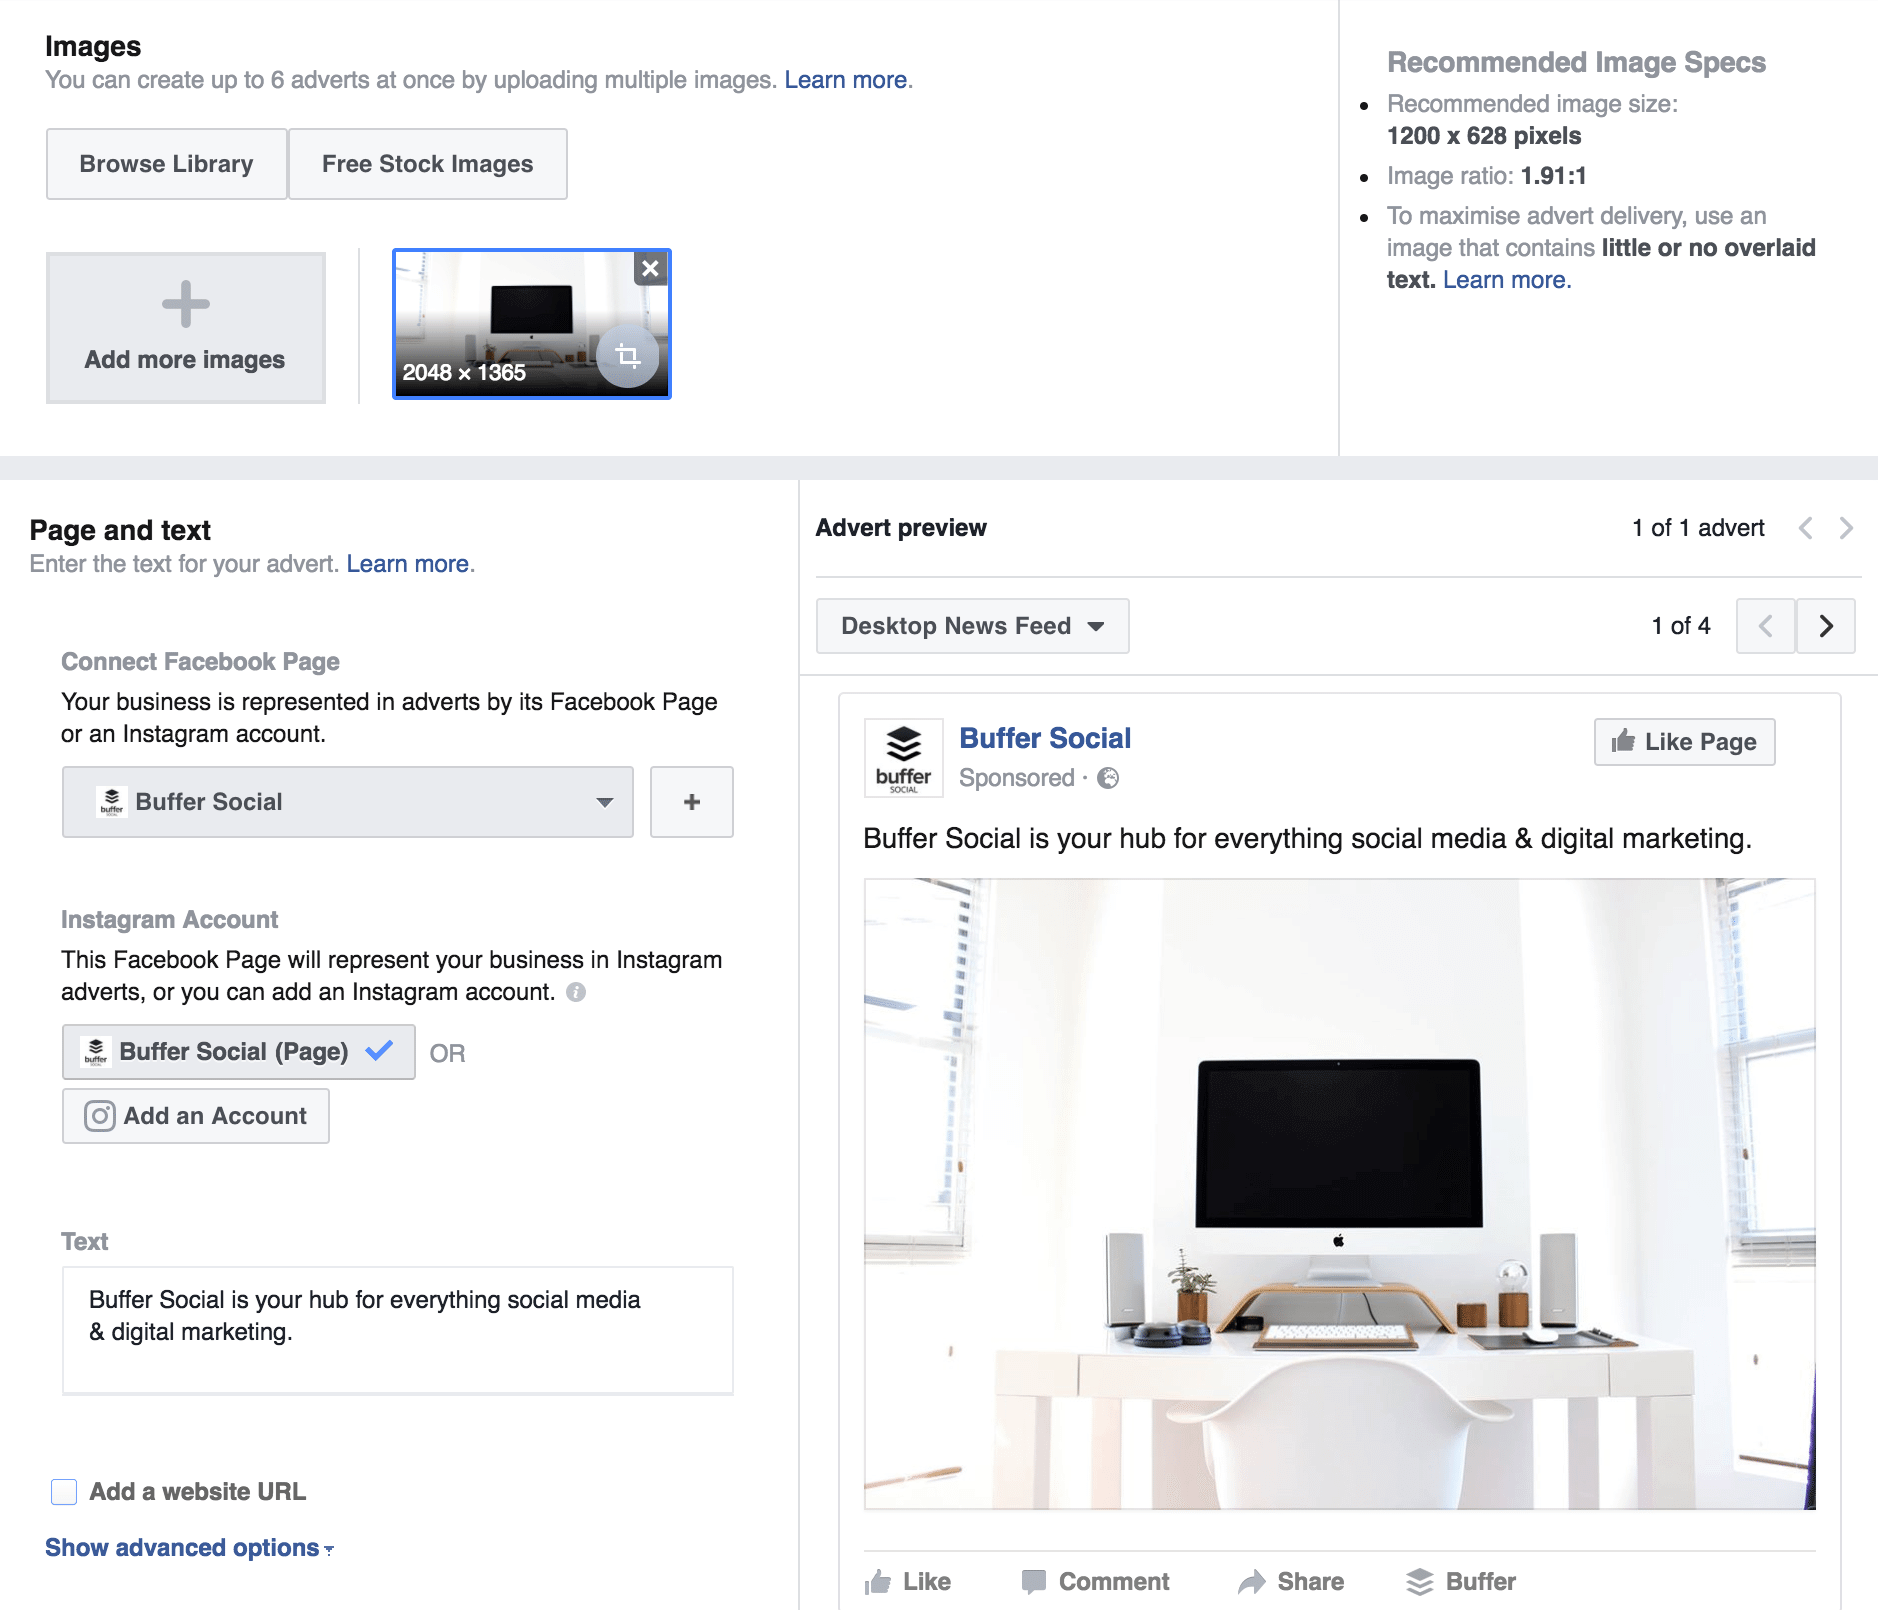 Images screen on Facebook Ads Manager